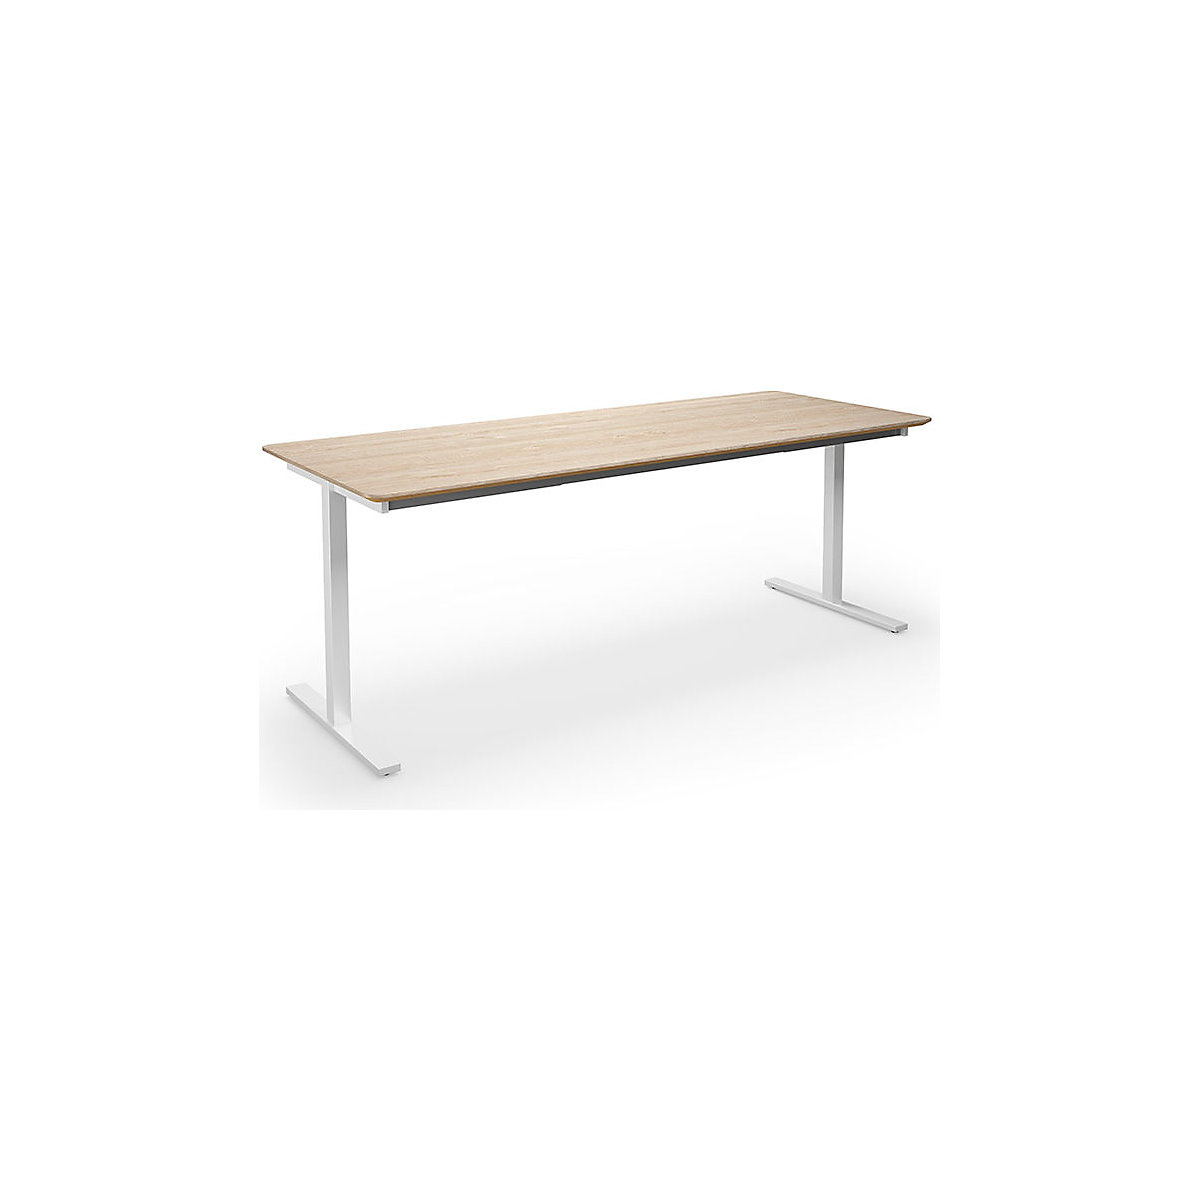 DUO-T Trend multi-purpose desk, straight tabletop, rounded corners, WxD 2000 x 800 mm, oak, white-2